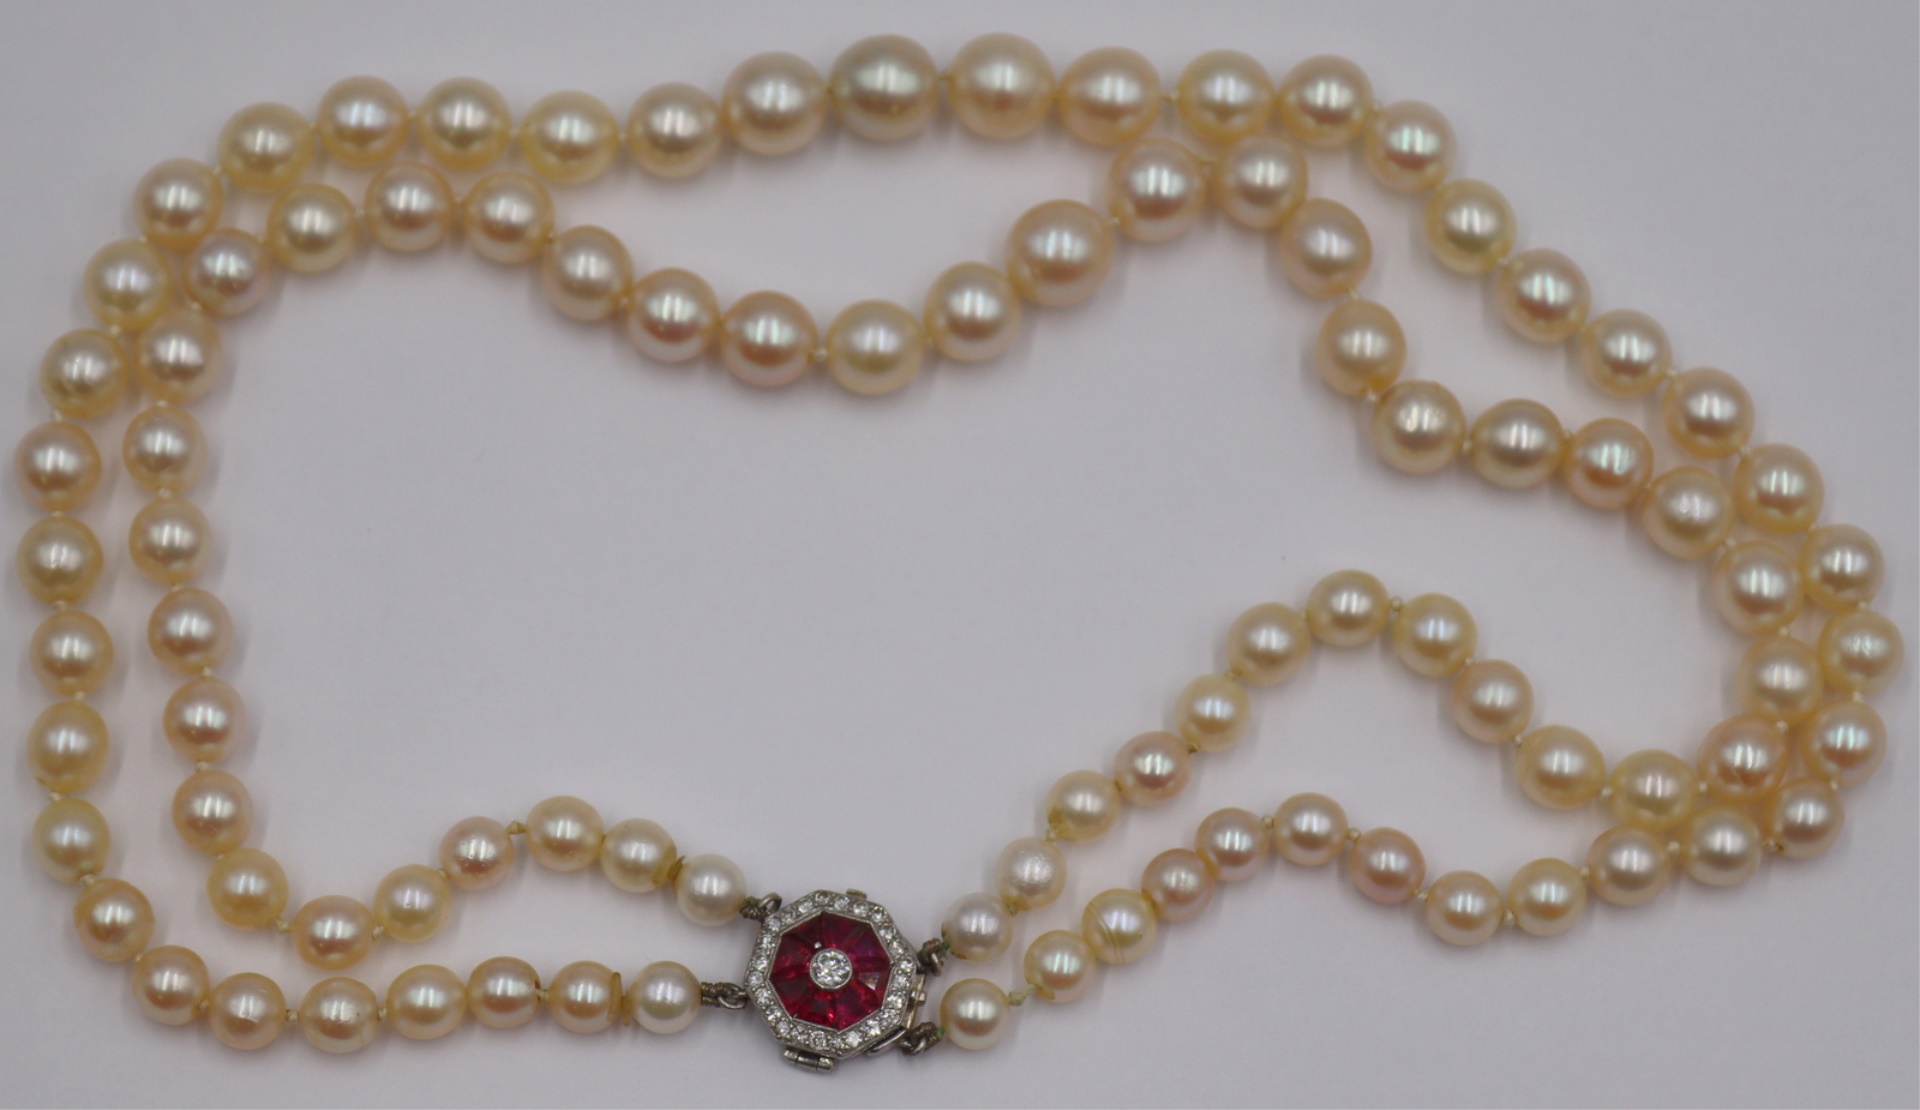 JEWELRY DOUBLE STRAND PEARL NECKLACE 3be55a